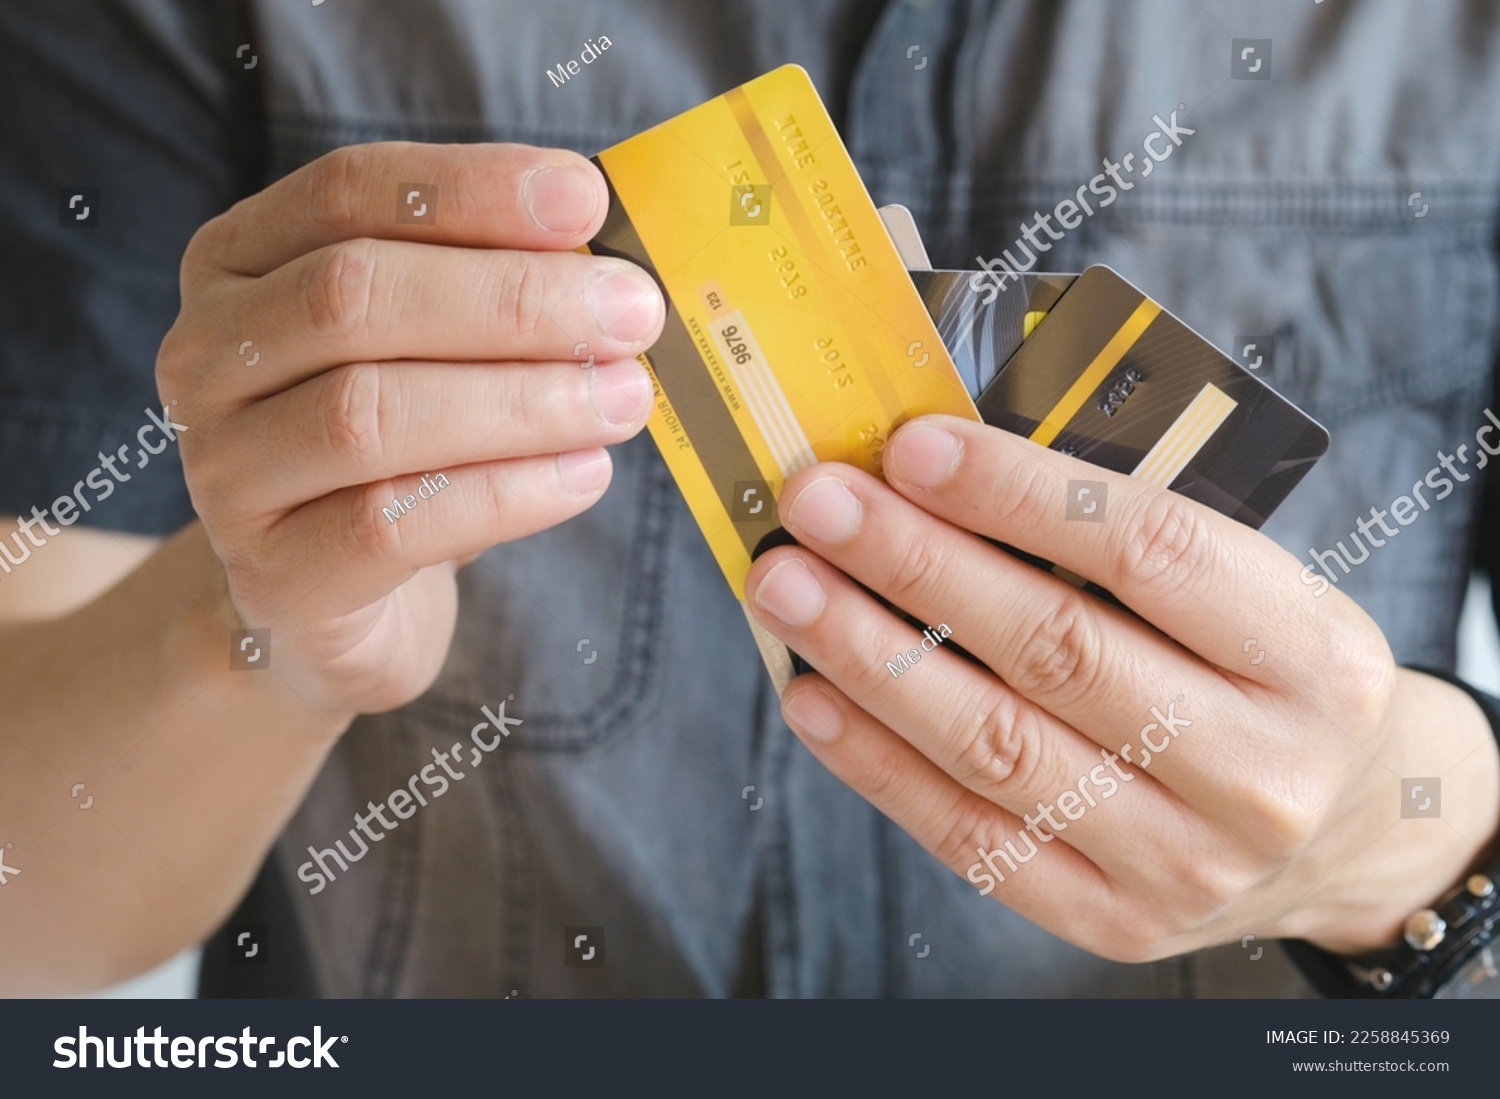 Man holding several credit cards and he is choosing a credit card to pay and spend Payment for goods via credit card. Finance and banking concept. #2258845369